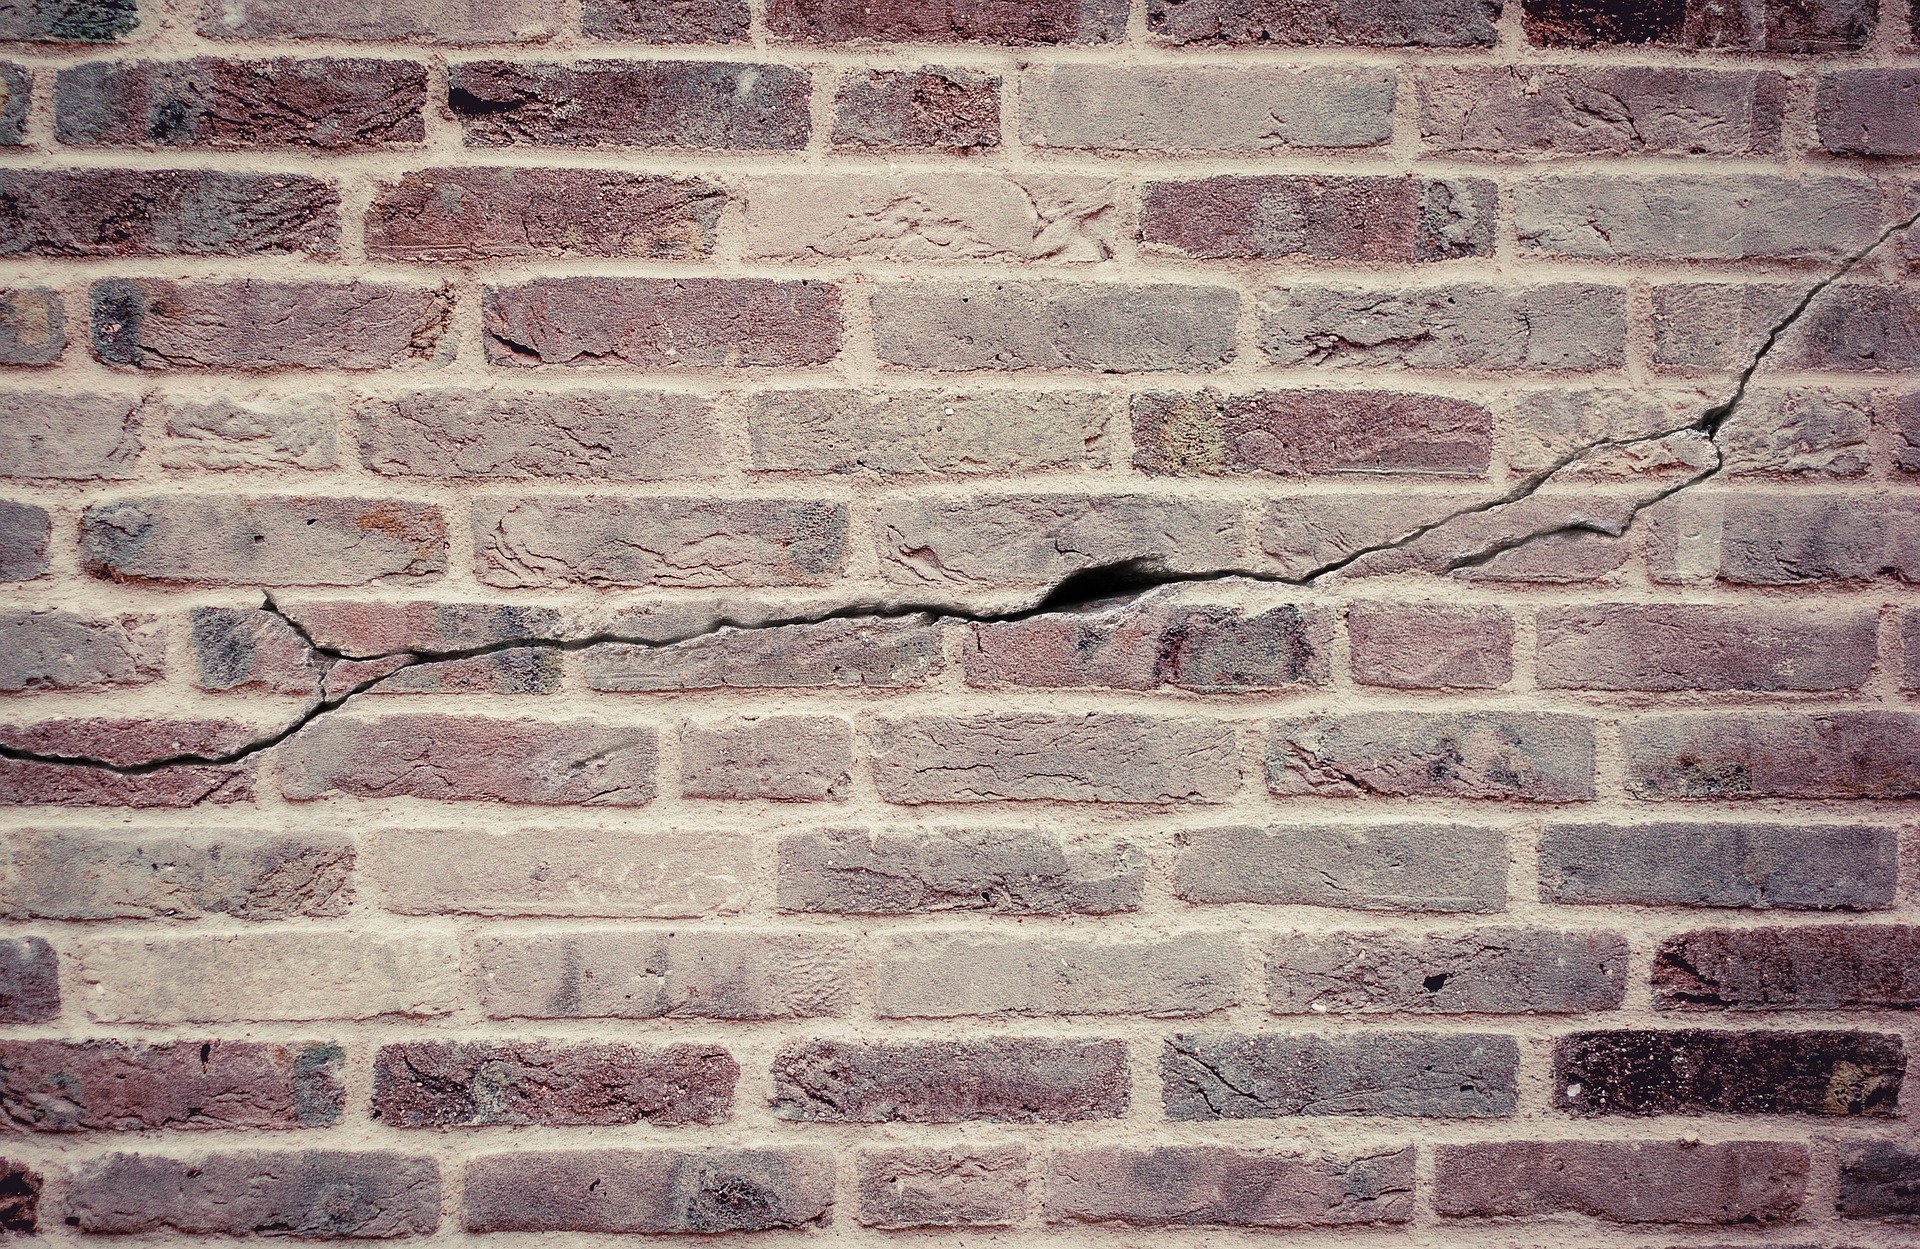 Read More About How to fix a bulging wall